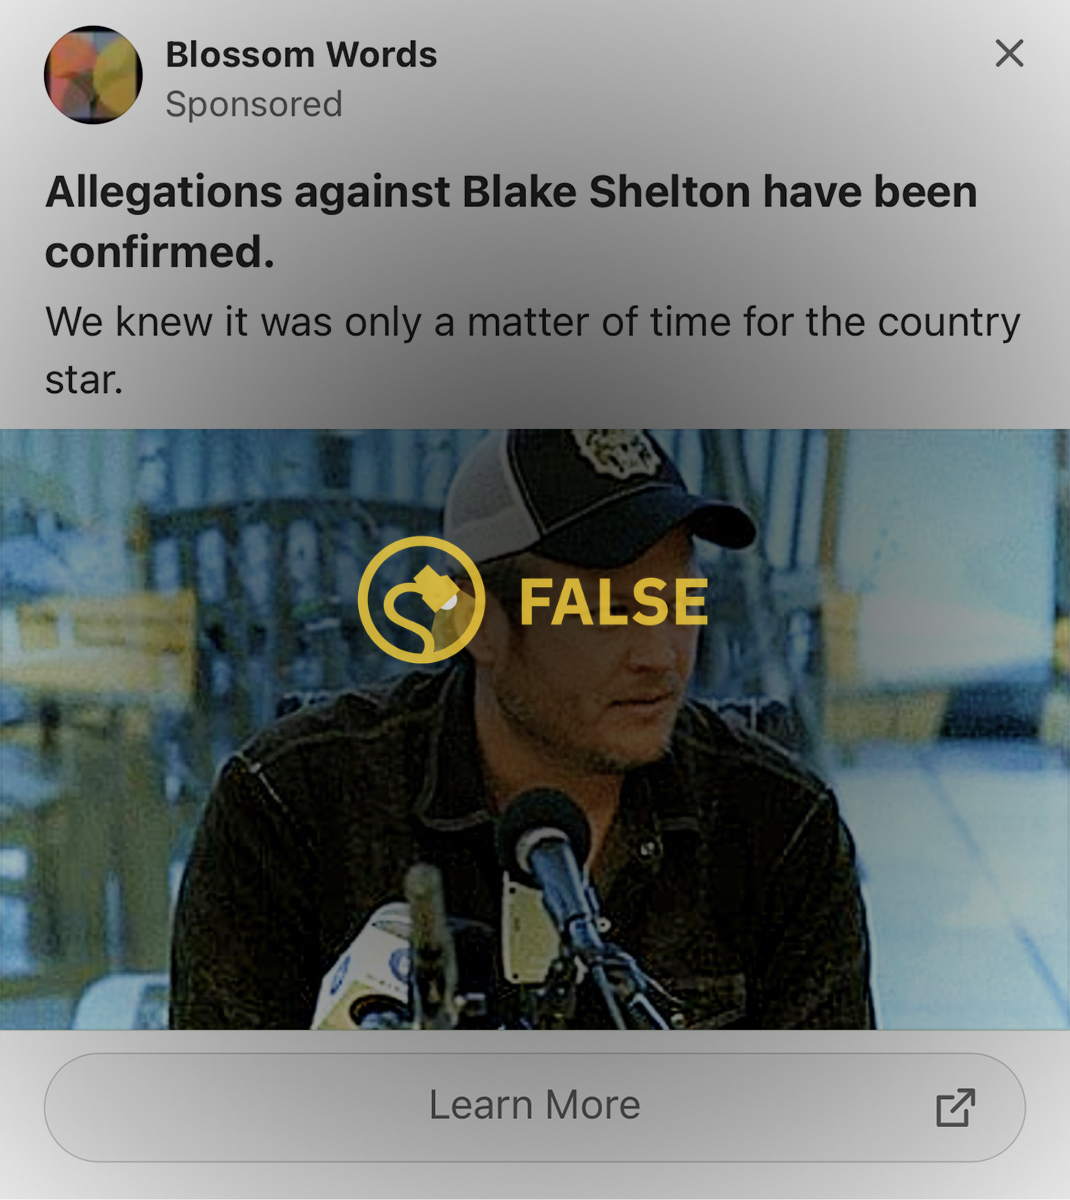 Blake Shelton did not have allegations against him confirmed nor did he endorse Natures Only CBD Gummies or get interviewed by Mail Online or The Daily Mail.